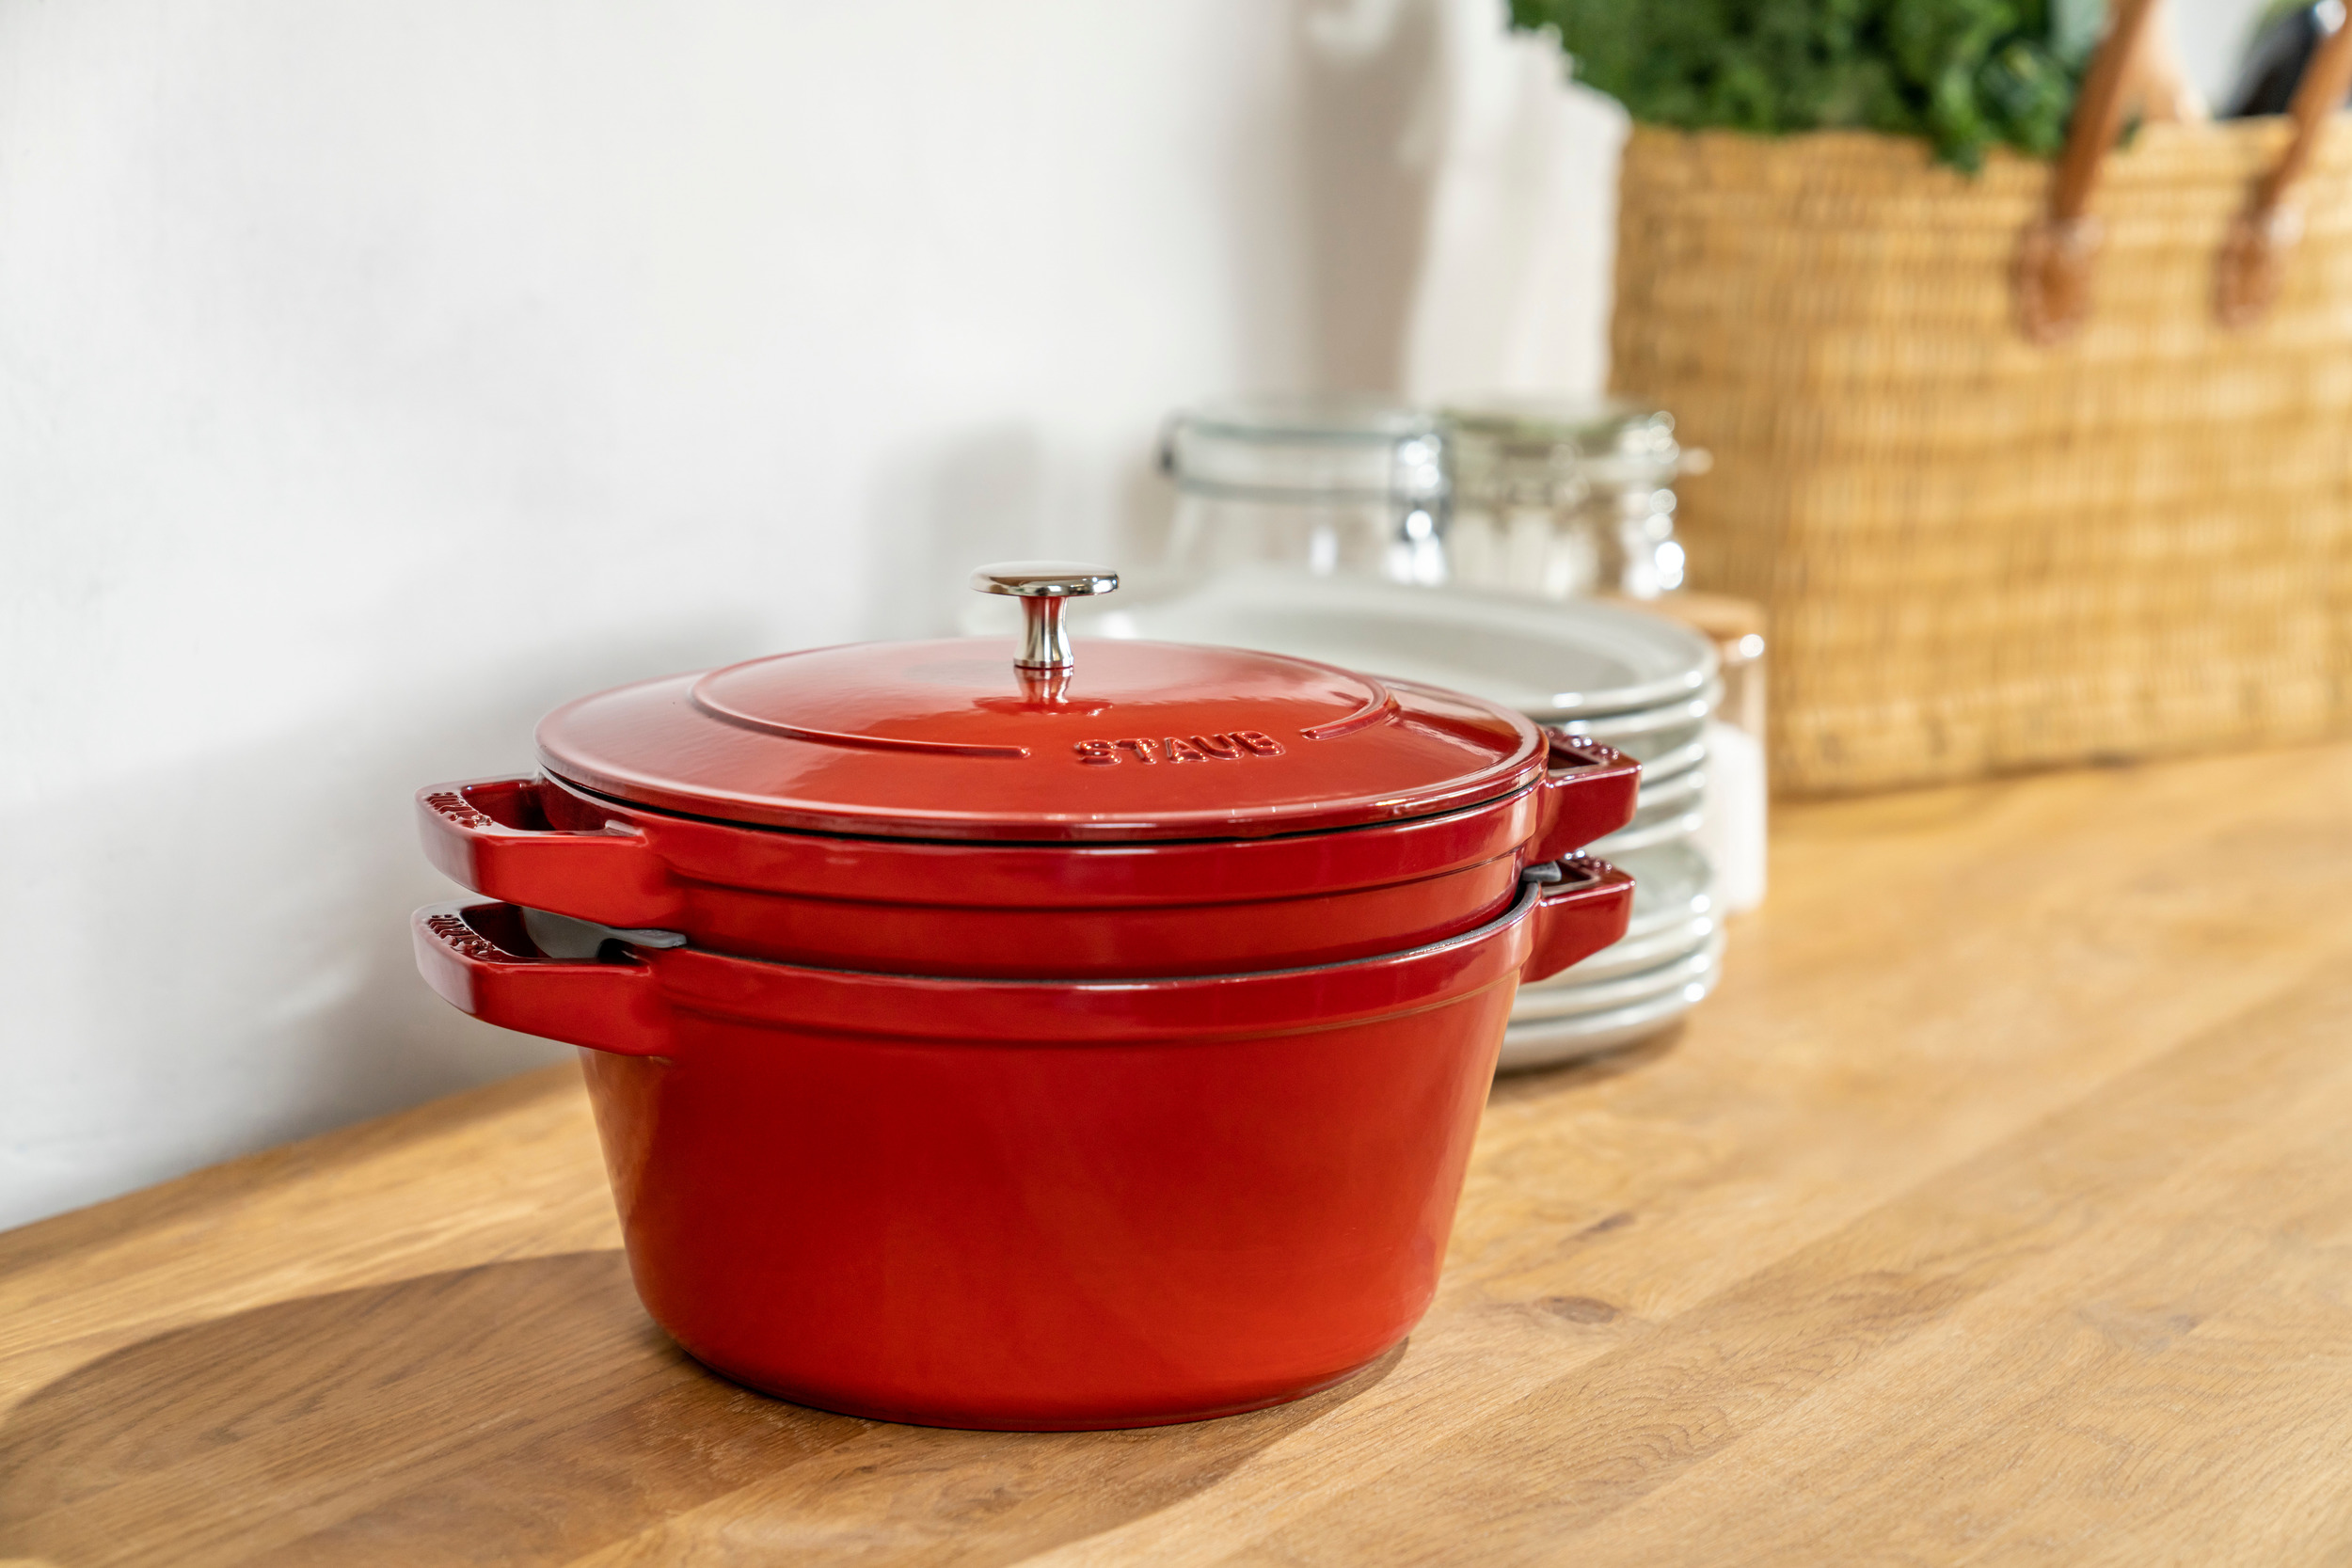 Staub Cooking pot 24 cm with pan and lid 3 el. - 40508-383-0